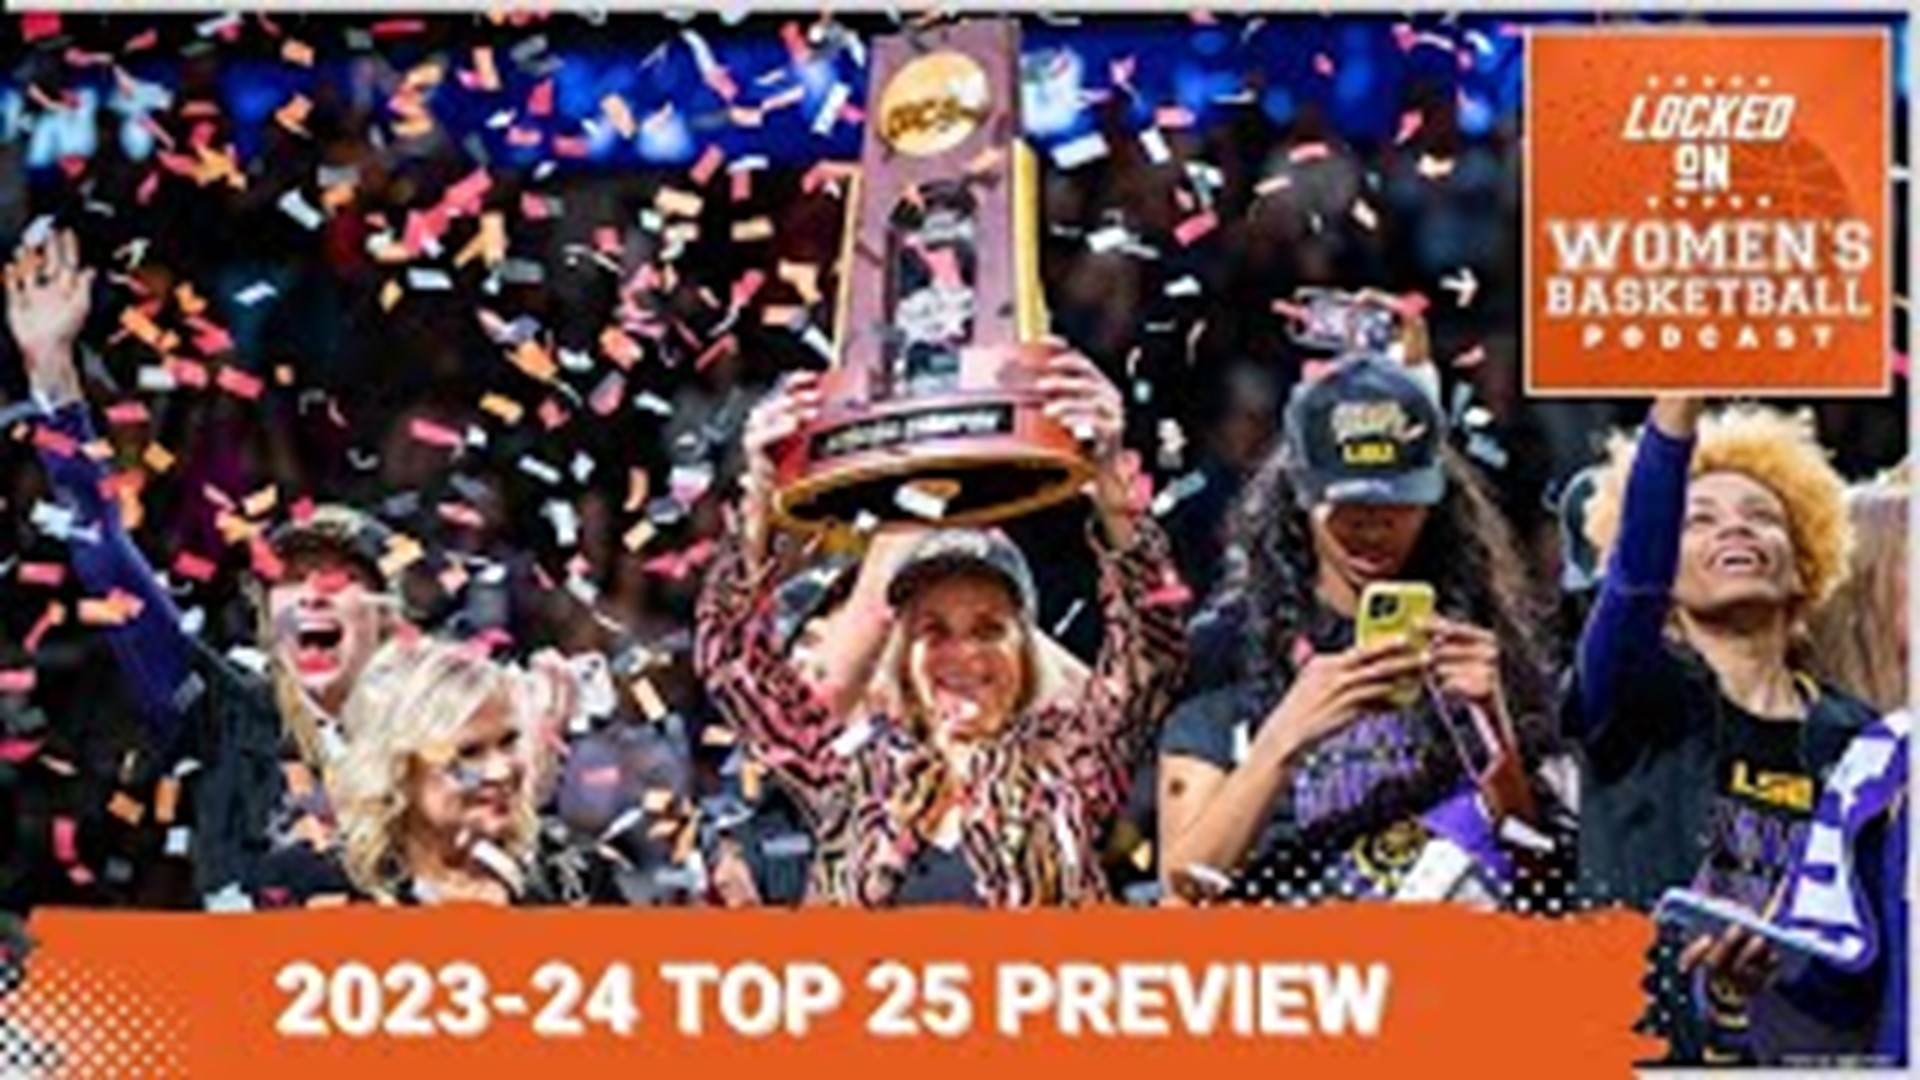 The 2023-24 college basketball season is almost here and so what better way to get ready than to run through The Next's Top 25 Preview!